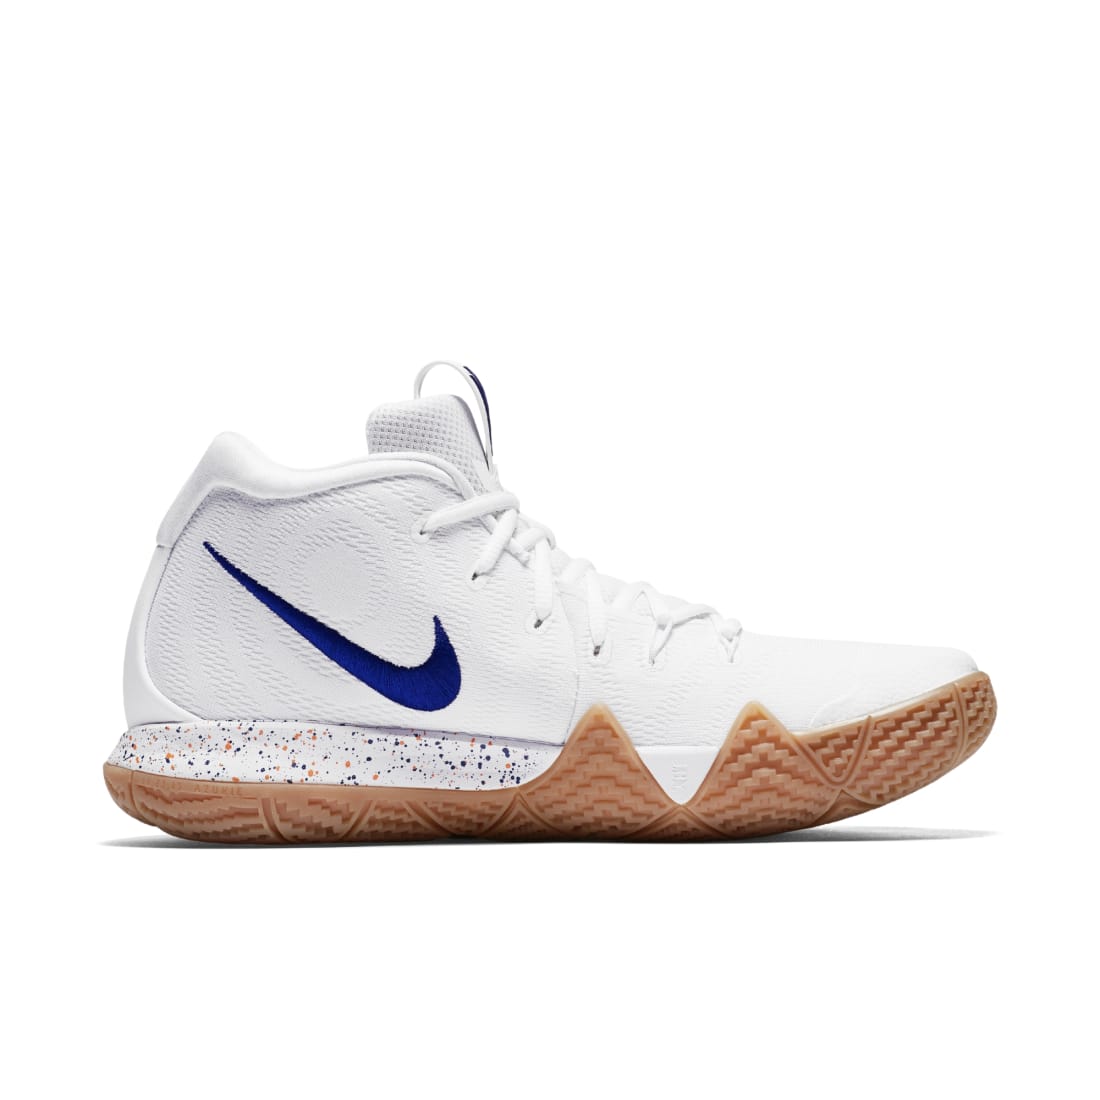 uncle drew nike shoes